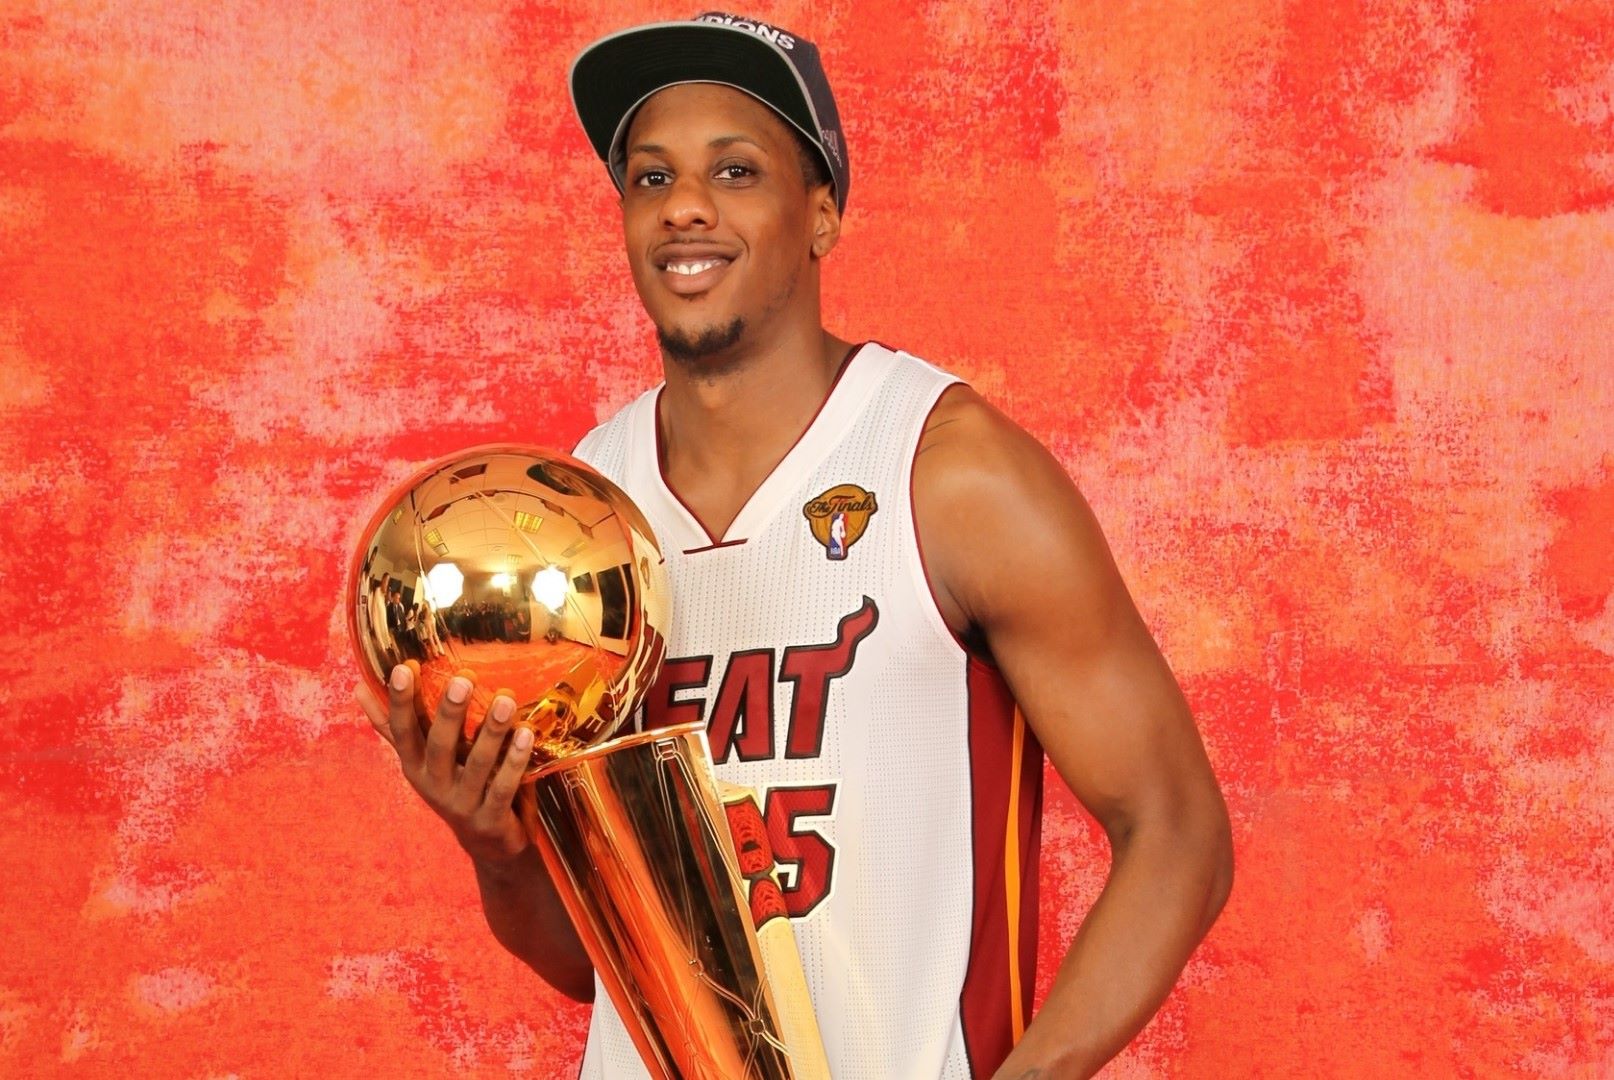 22-mind-blowing-facts-about-mario-chalmers